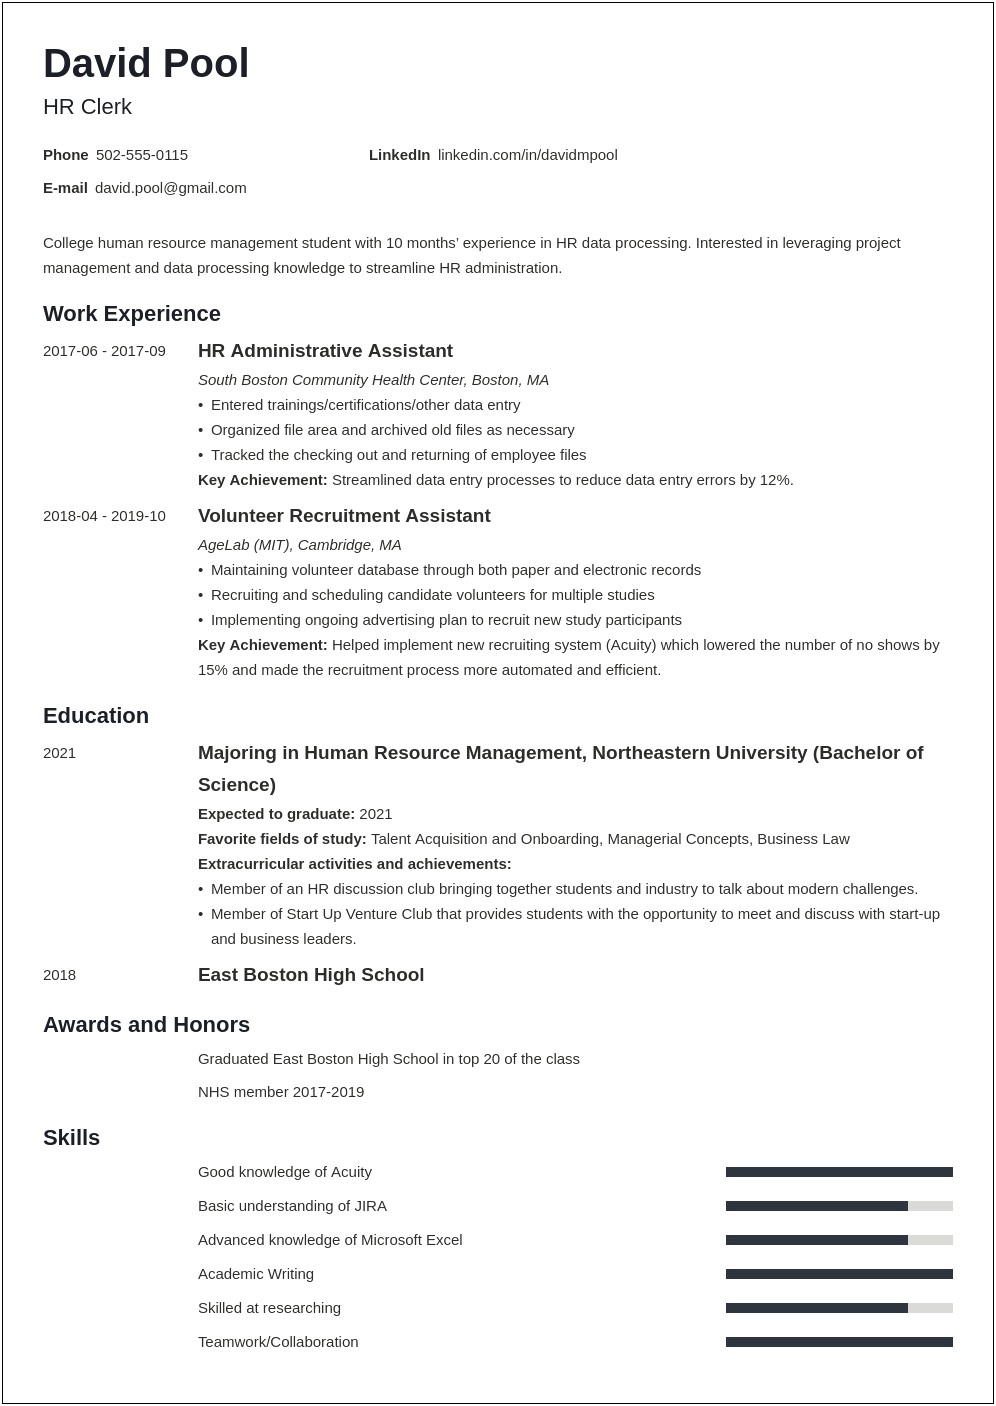 Example Of Academic Resume For College